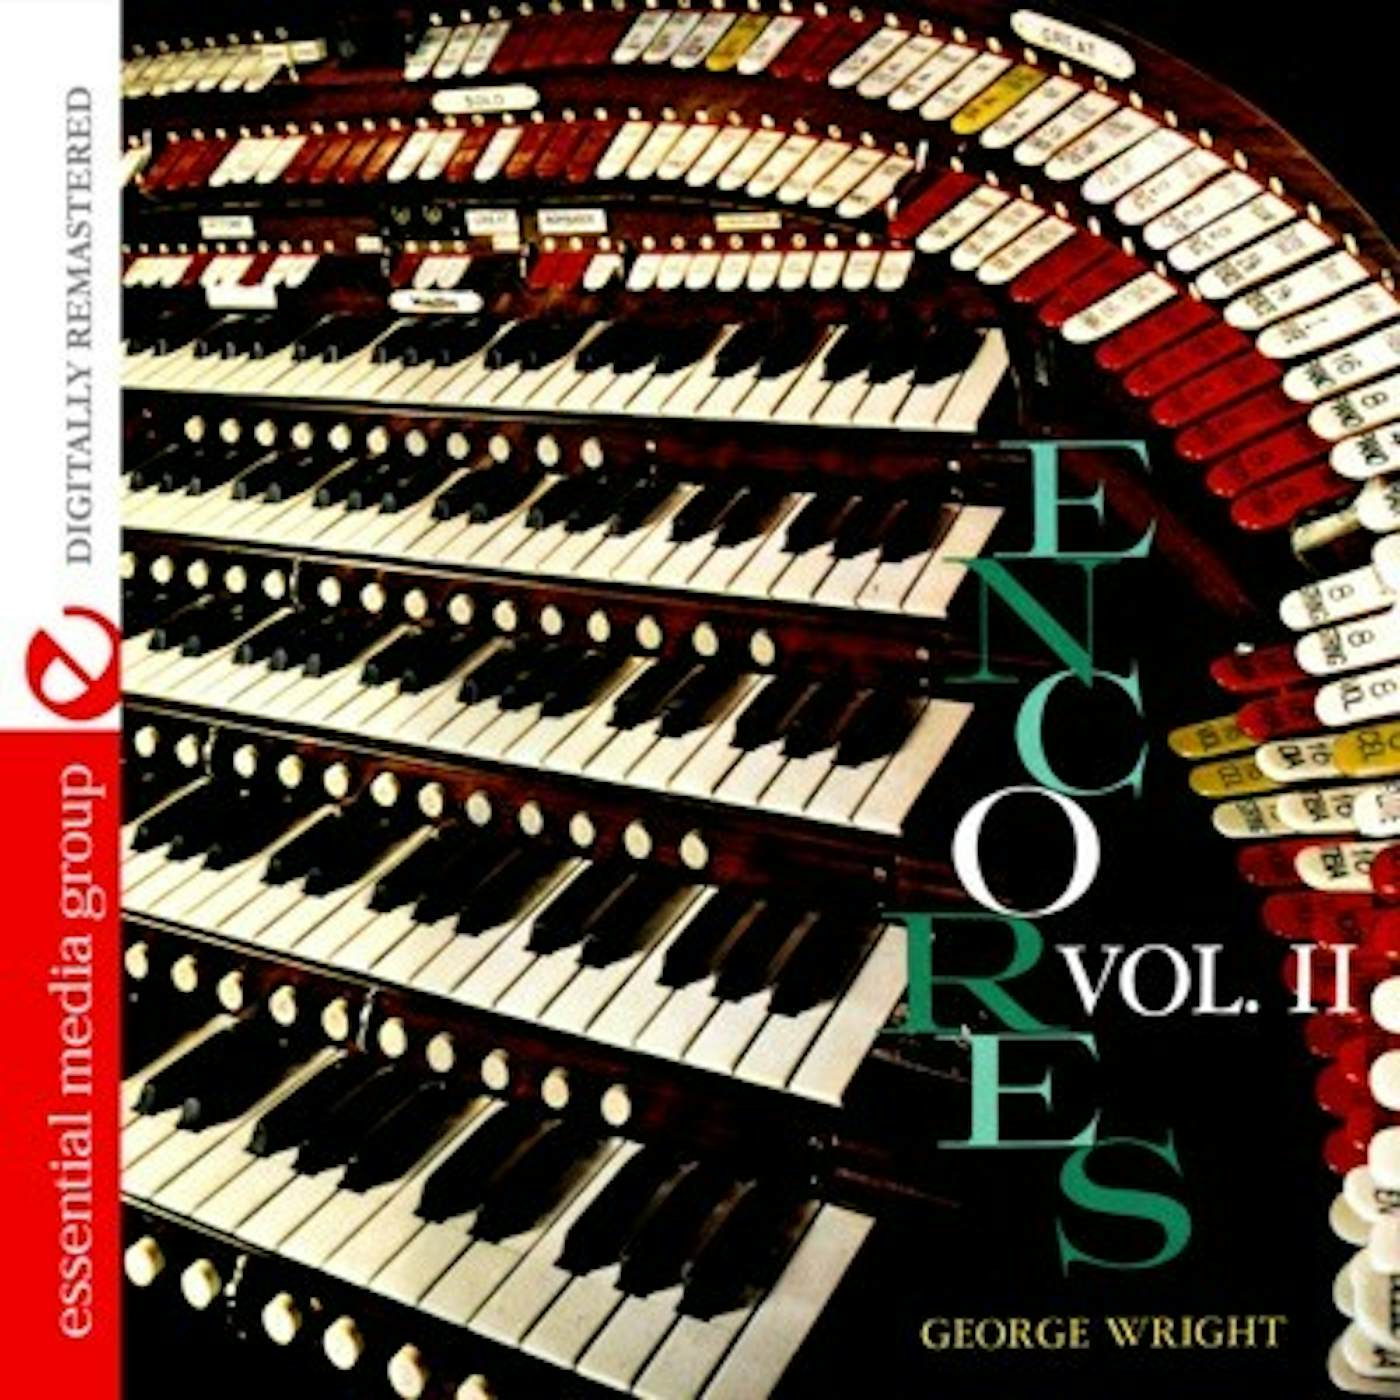 George Wright ENCORES 2 CD